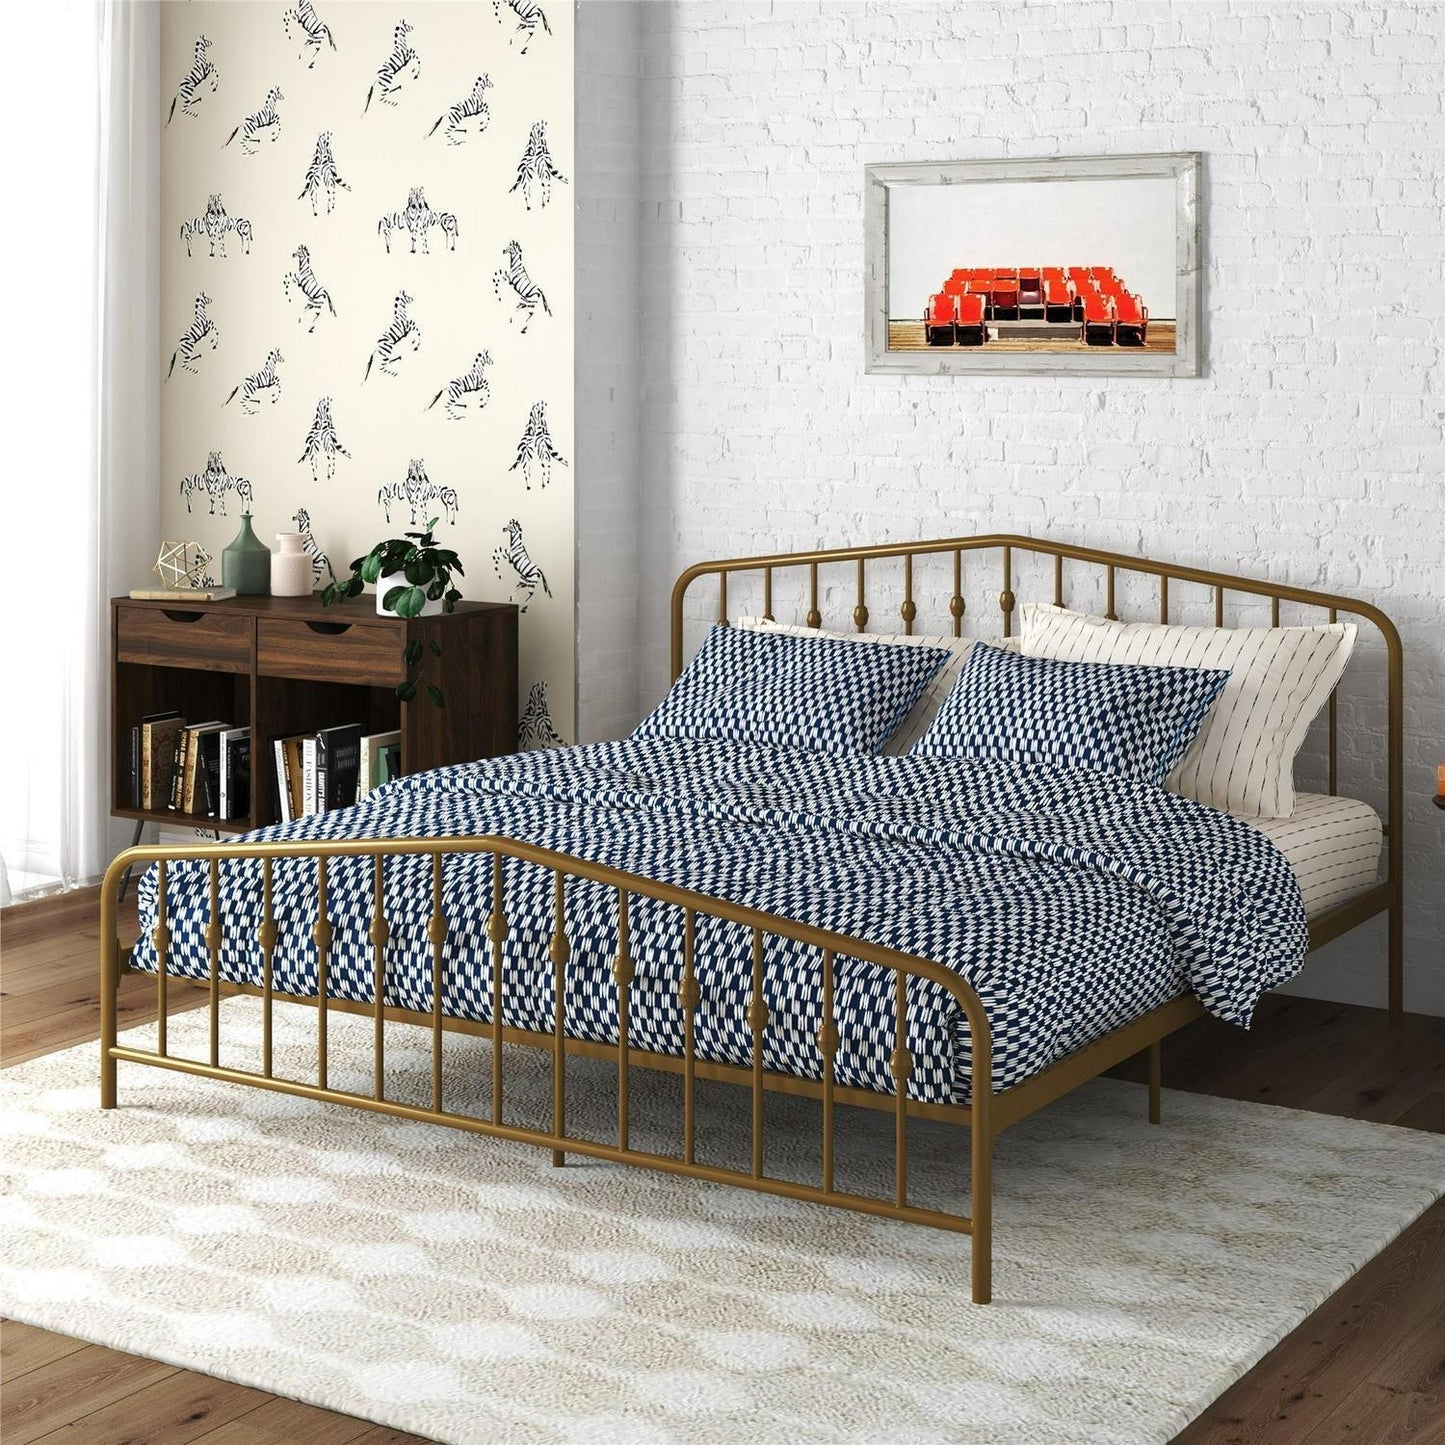 Gold Finish Metal Platform Bed in Off White Decorative Spindles QUEEN Size